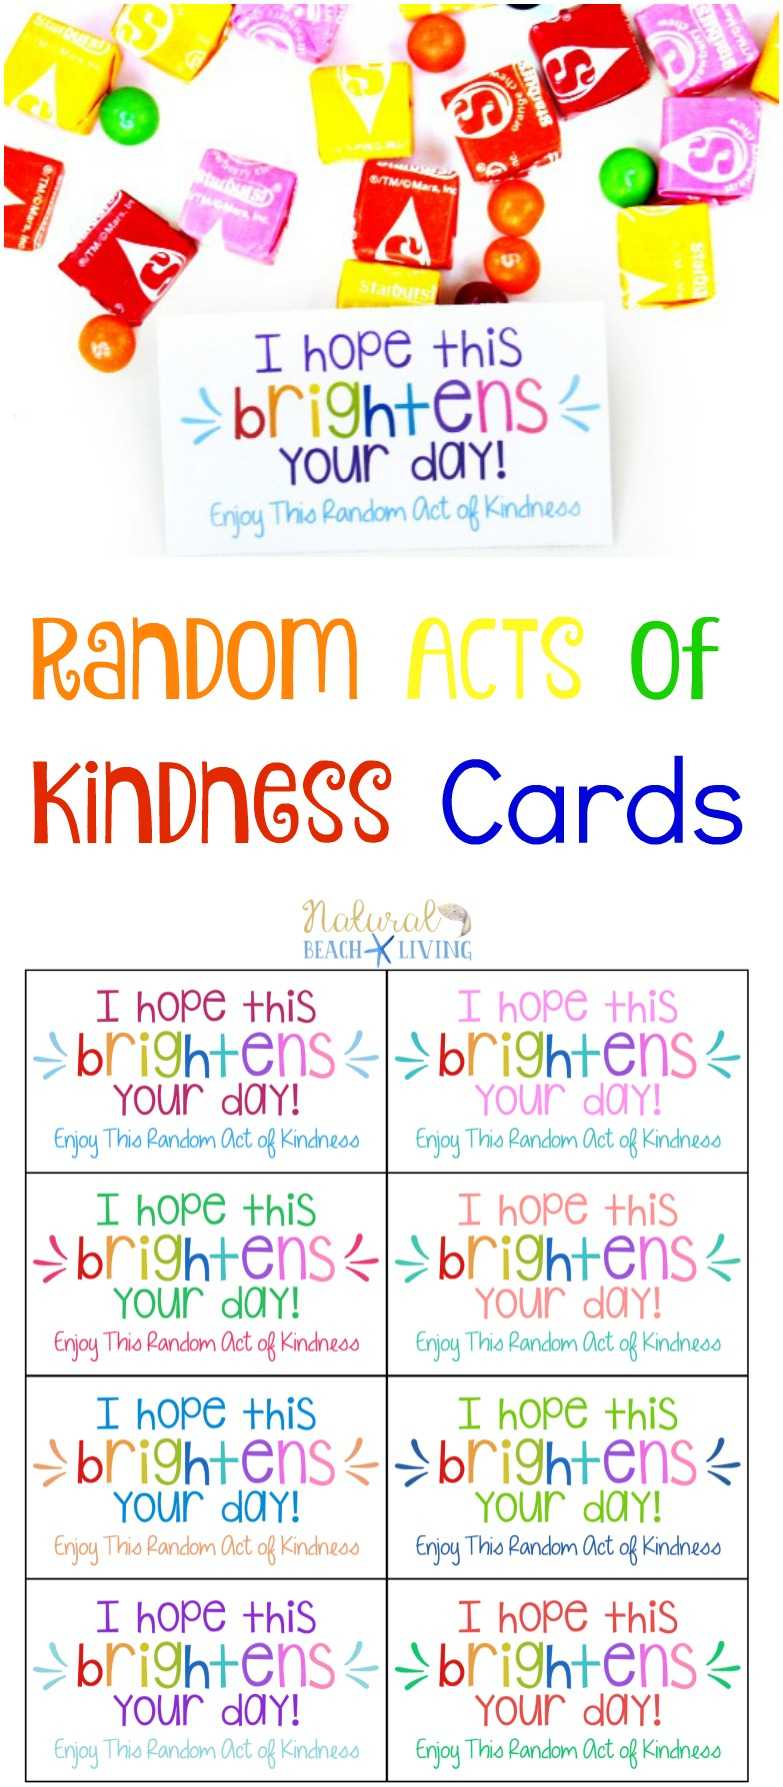 The Best Random Acts Of Kindness Printable Cards Free Regarding Random Acts Of Kindness Cards Templates